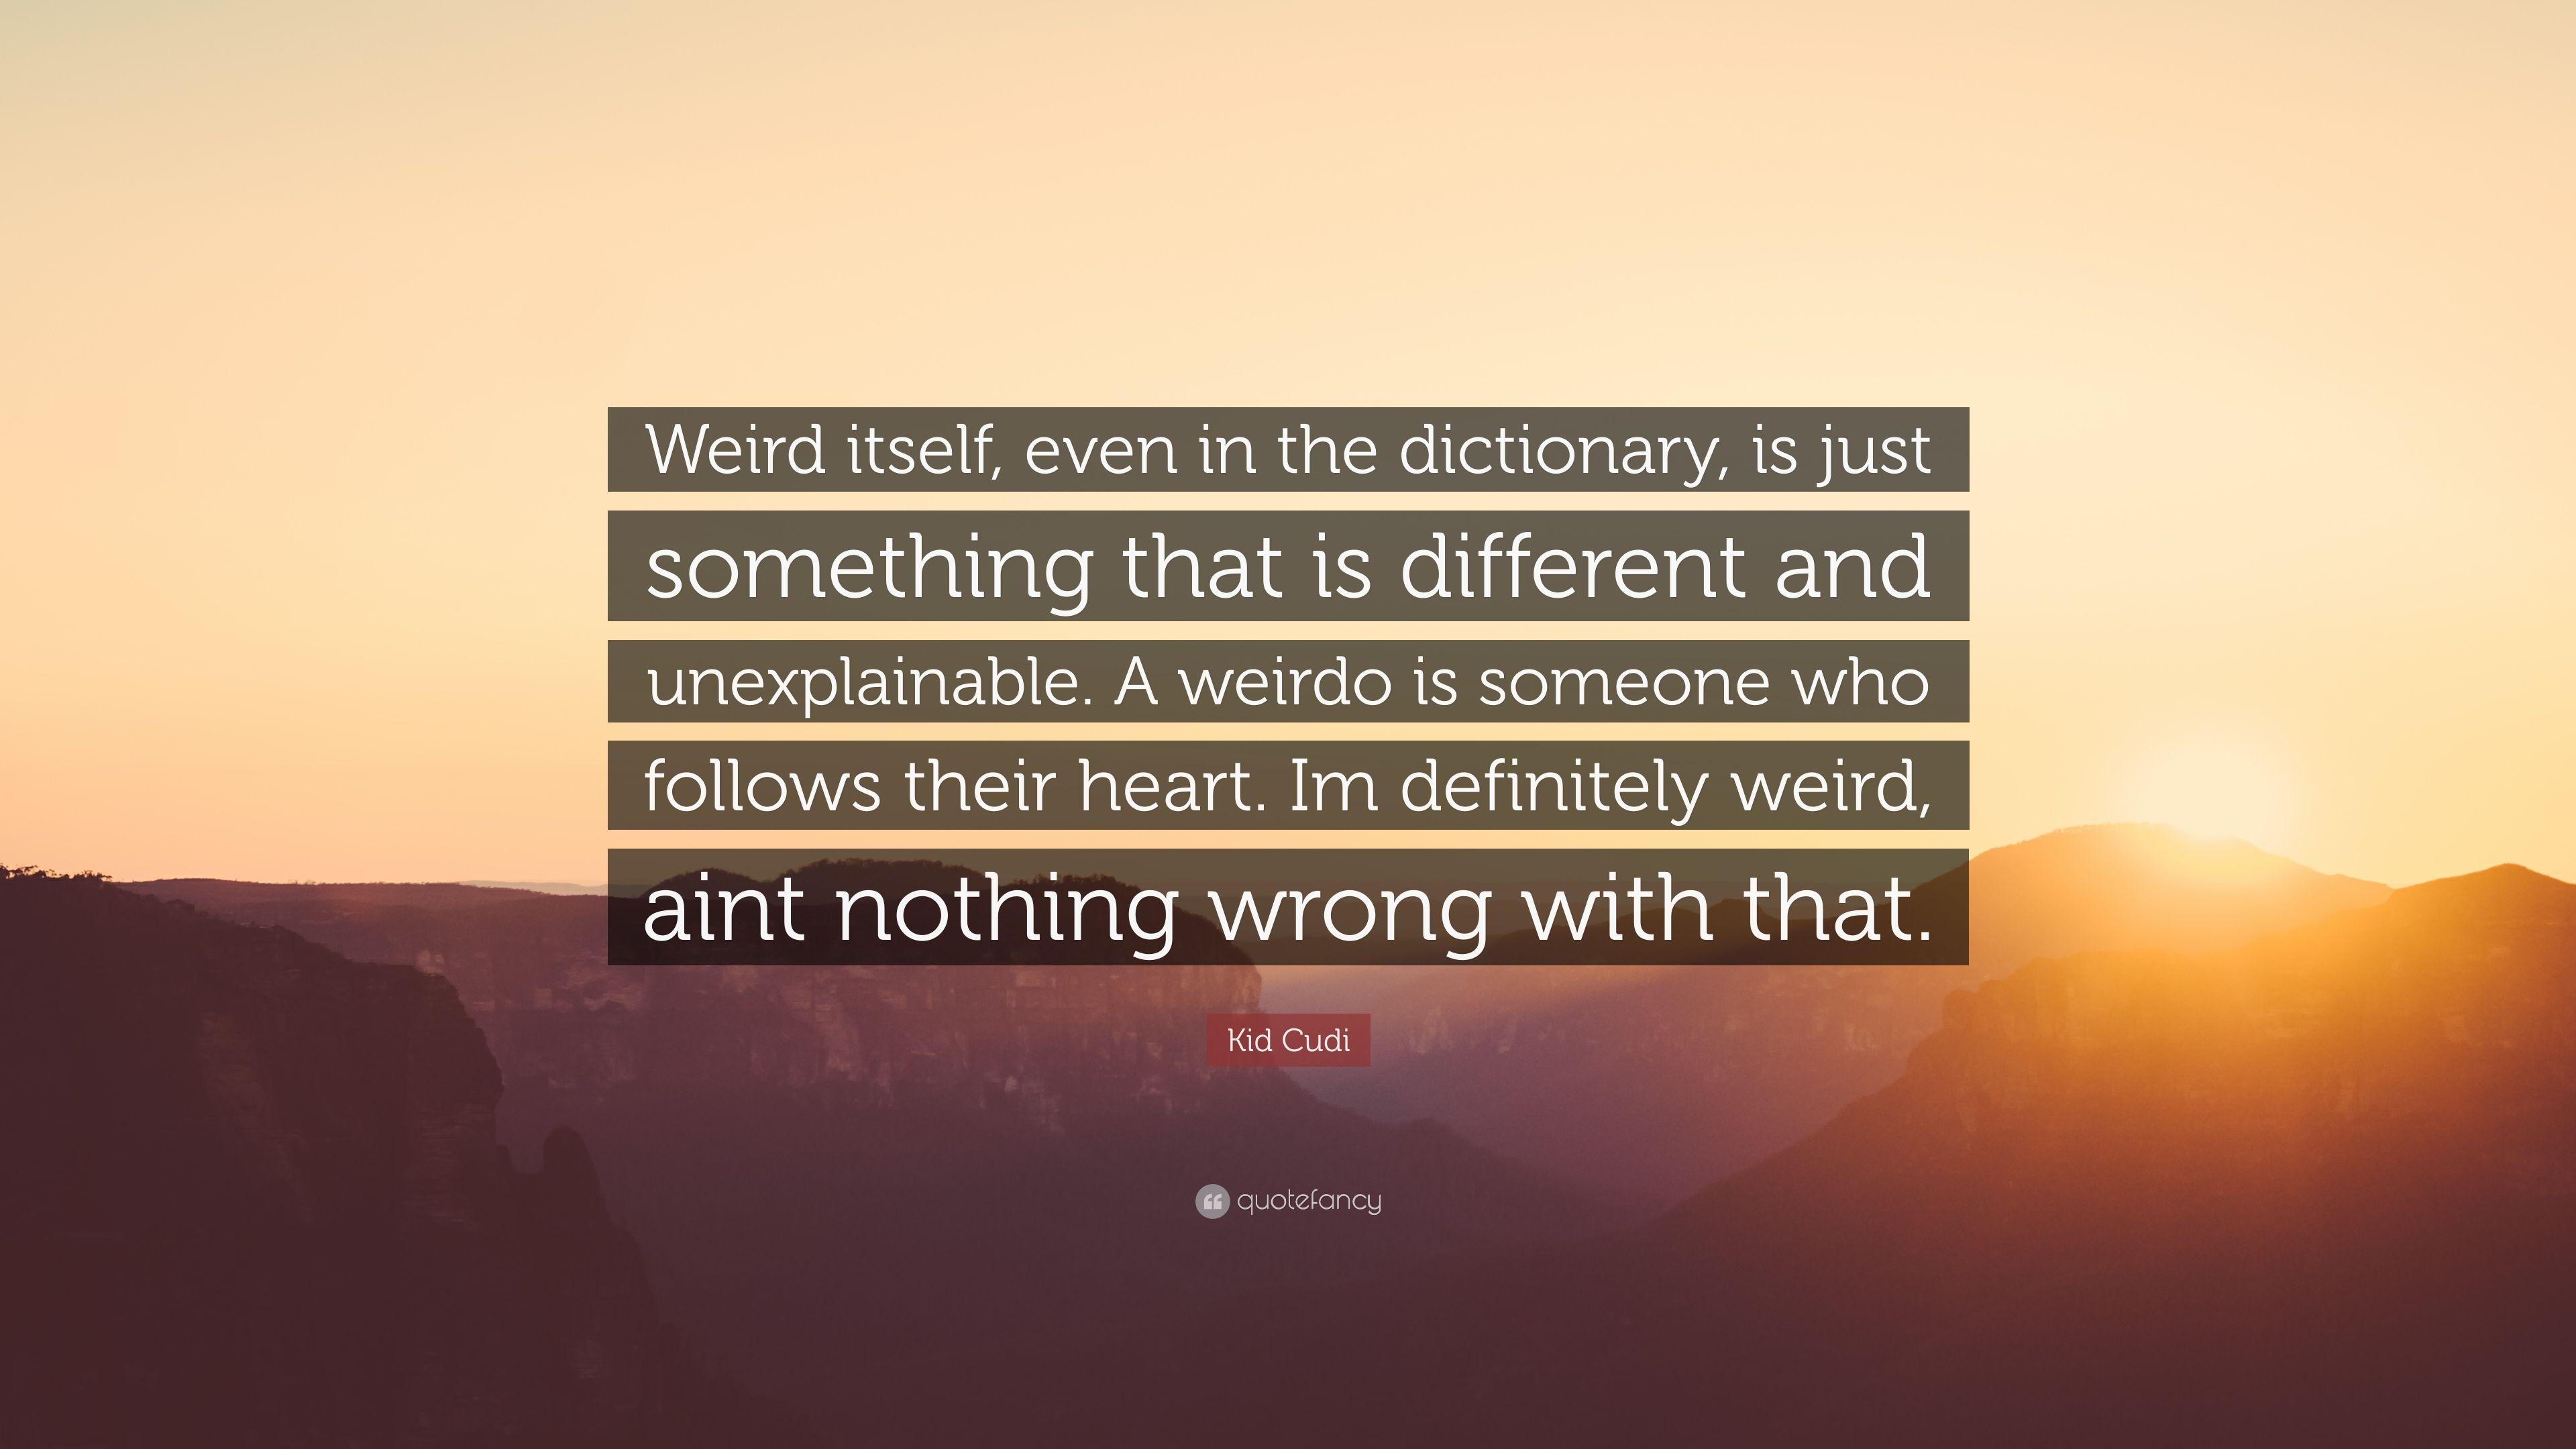 Kid Cudi Quote: “Weird itself, even in the dictionary, is just